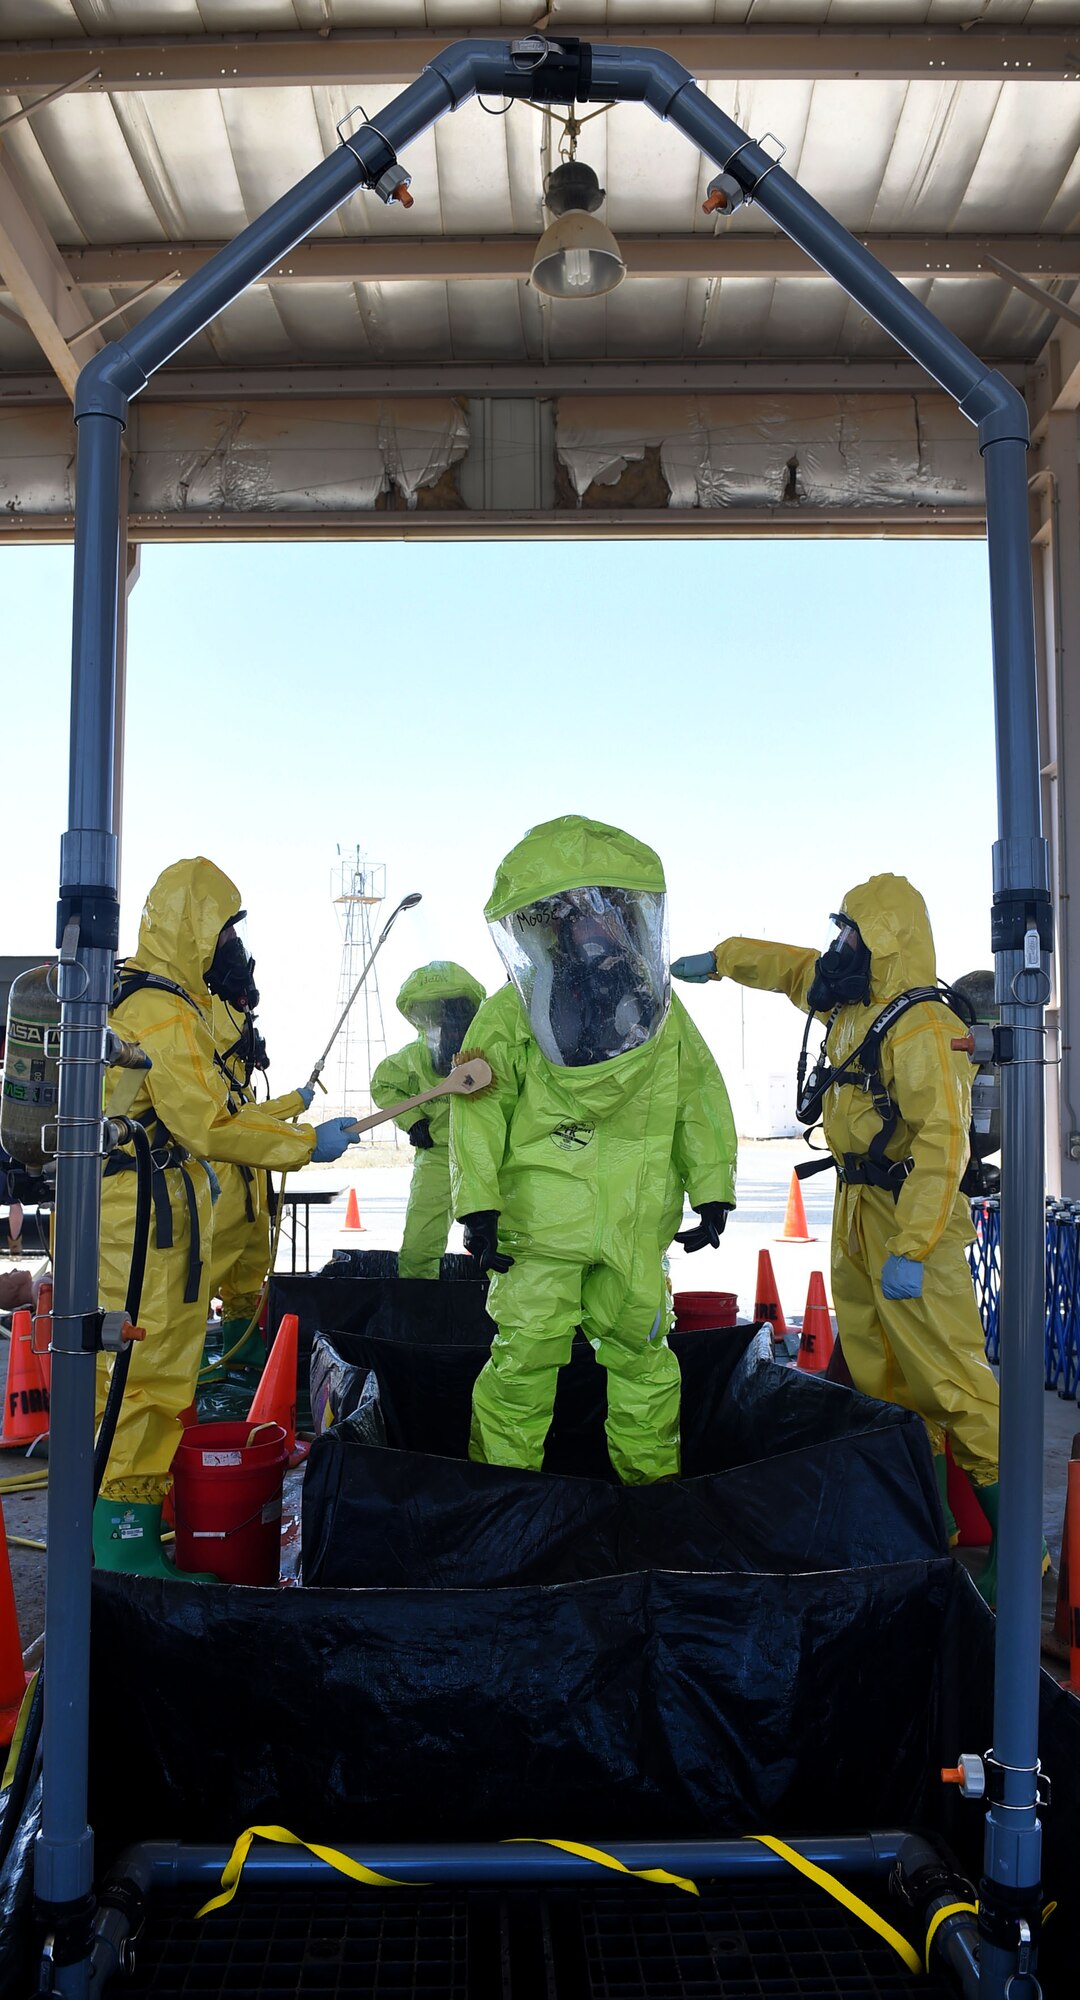 An Airman from the 386th Expeditionary Civil Engineer Squadron goes through the decontamination process during a Hazardous Materials Technician Certification course exercise at an undisclosed location in Southwest Asia, April 15, 2016. The exercise simulated a chlorine gas leak to which the fire department, emergency management and medical teams from the 386th and 332nd ECES teams responded. (U.S. Air Force photo by Staff Sgt. Jerilyn Quintanilla)